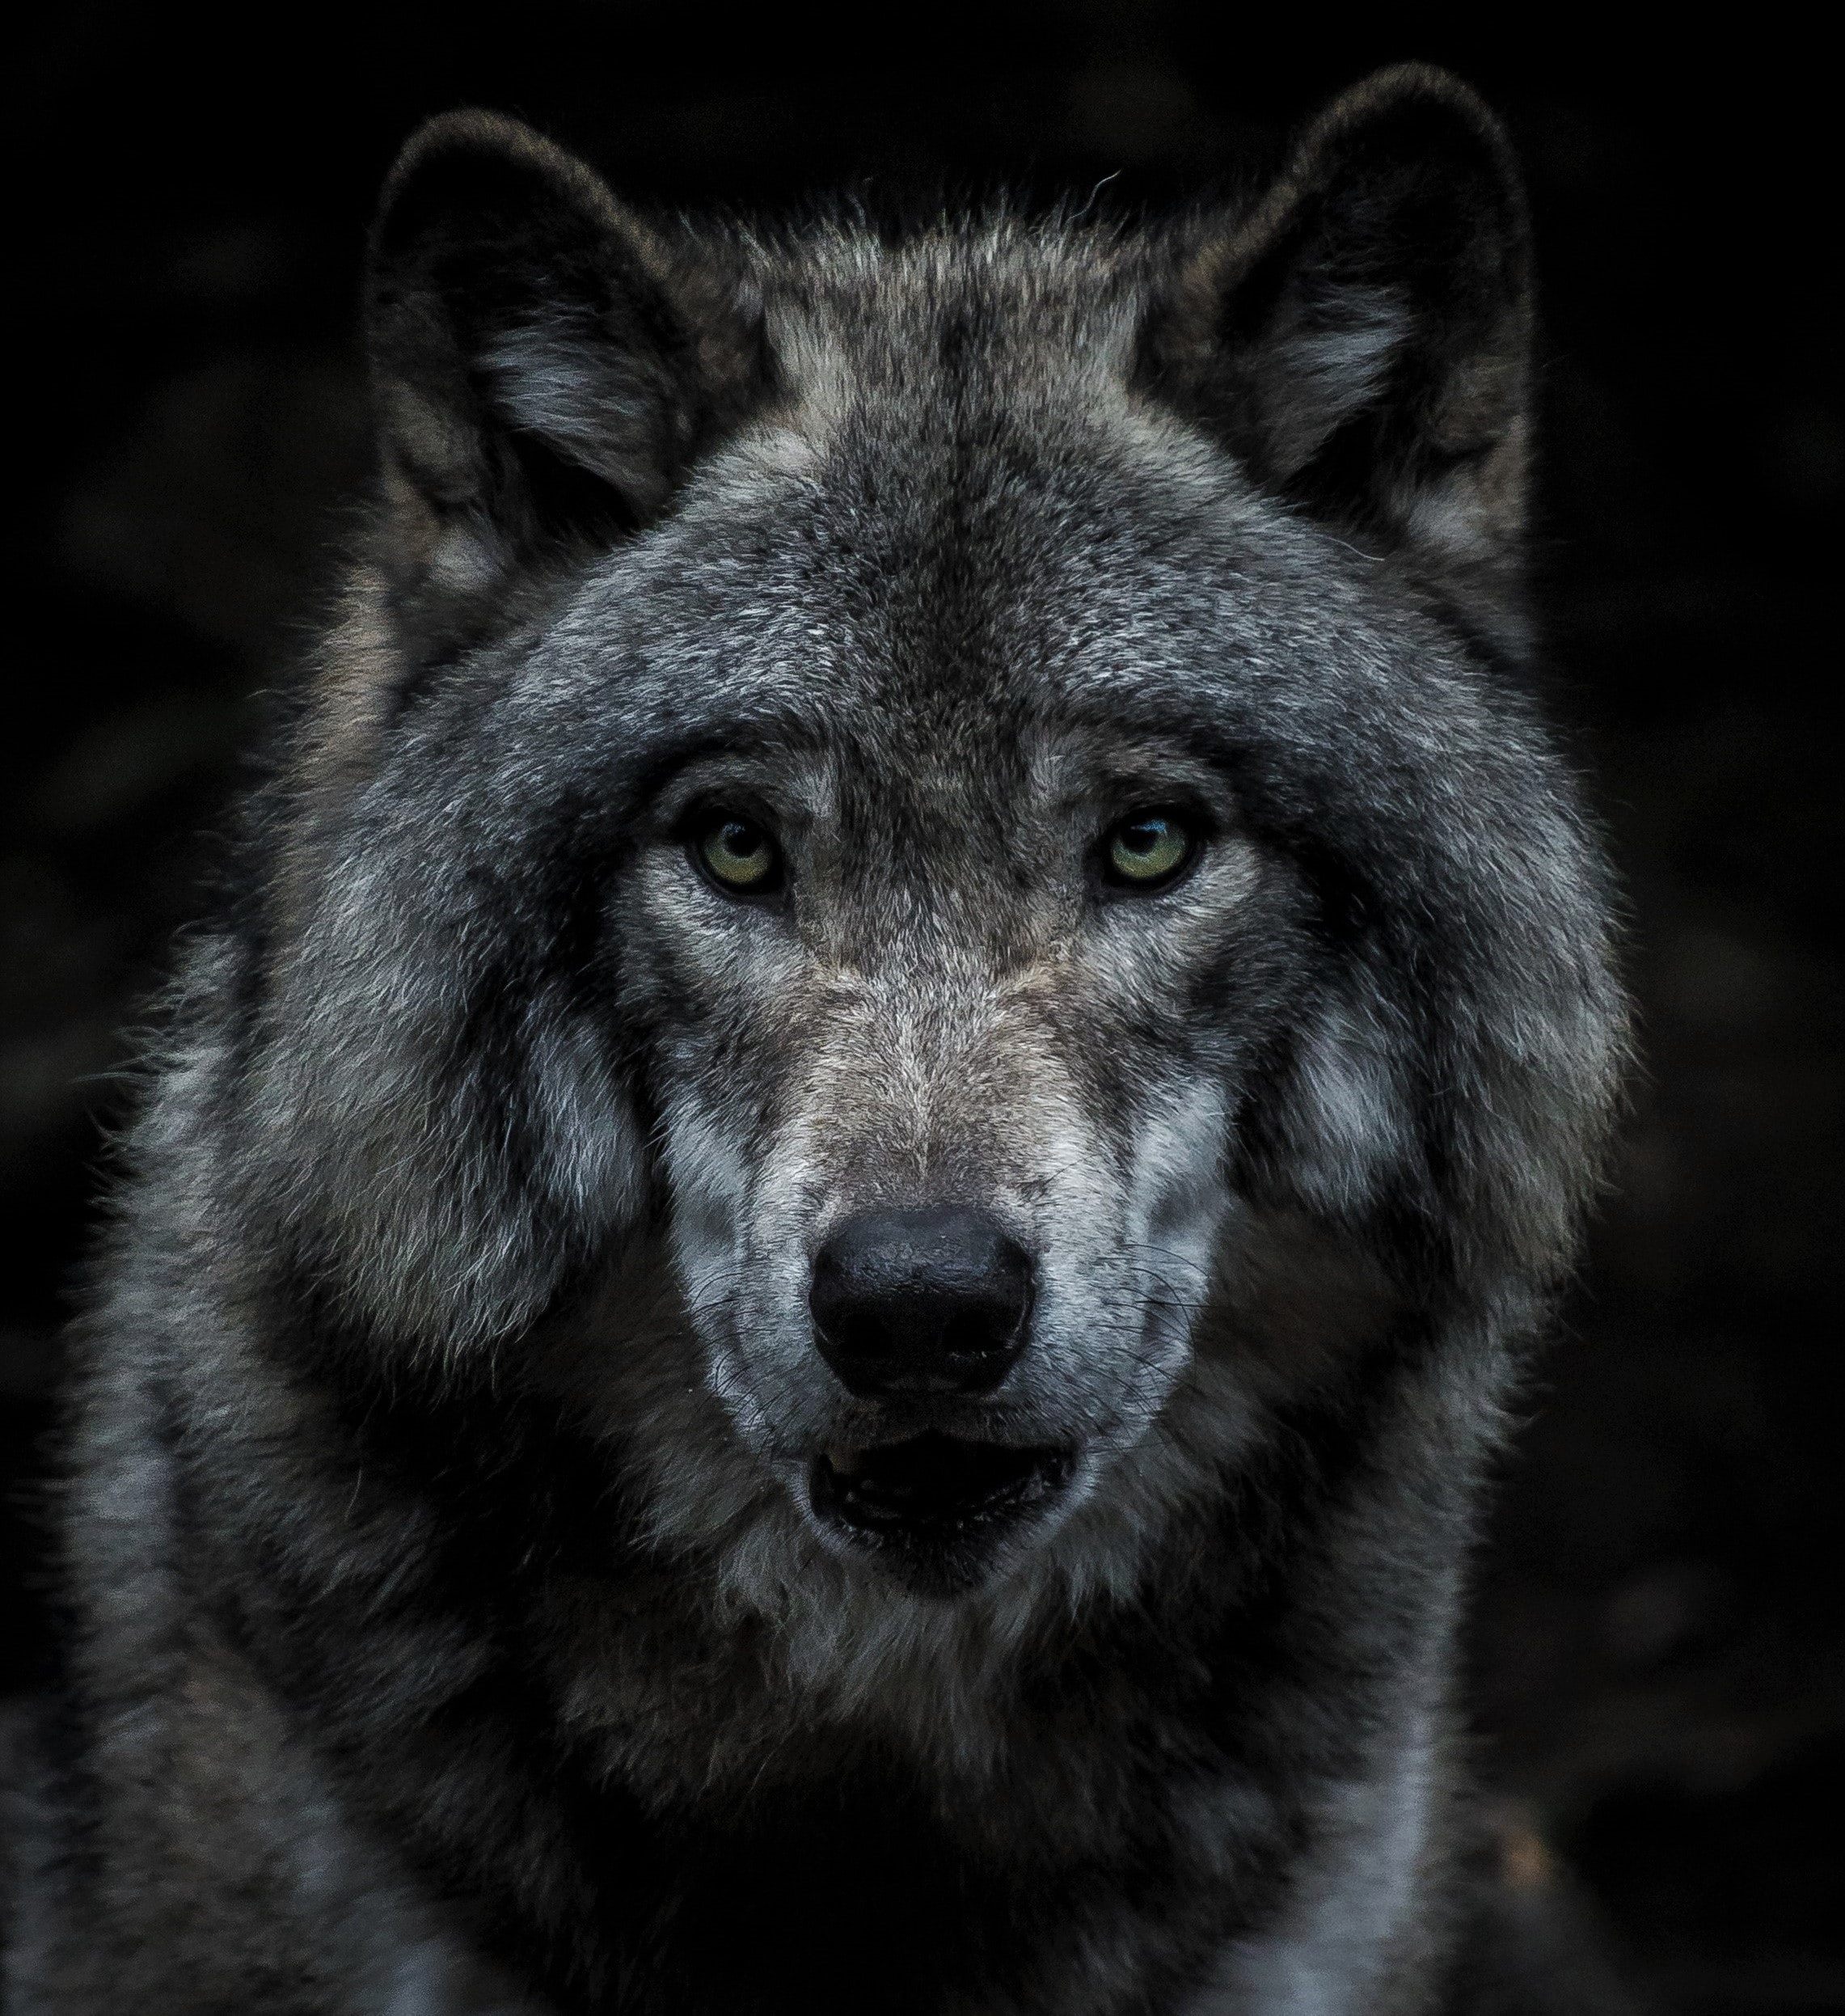 138147 download wallpaper wolf, animals, muzzle, predator, grey screensavers and pictures for free